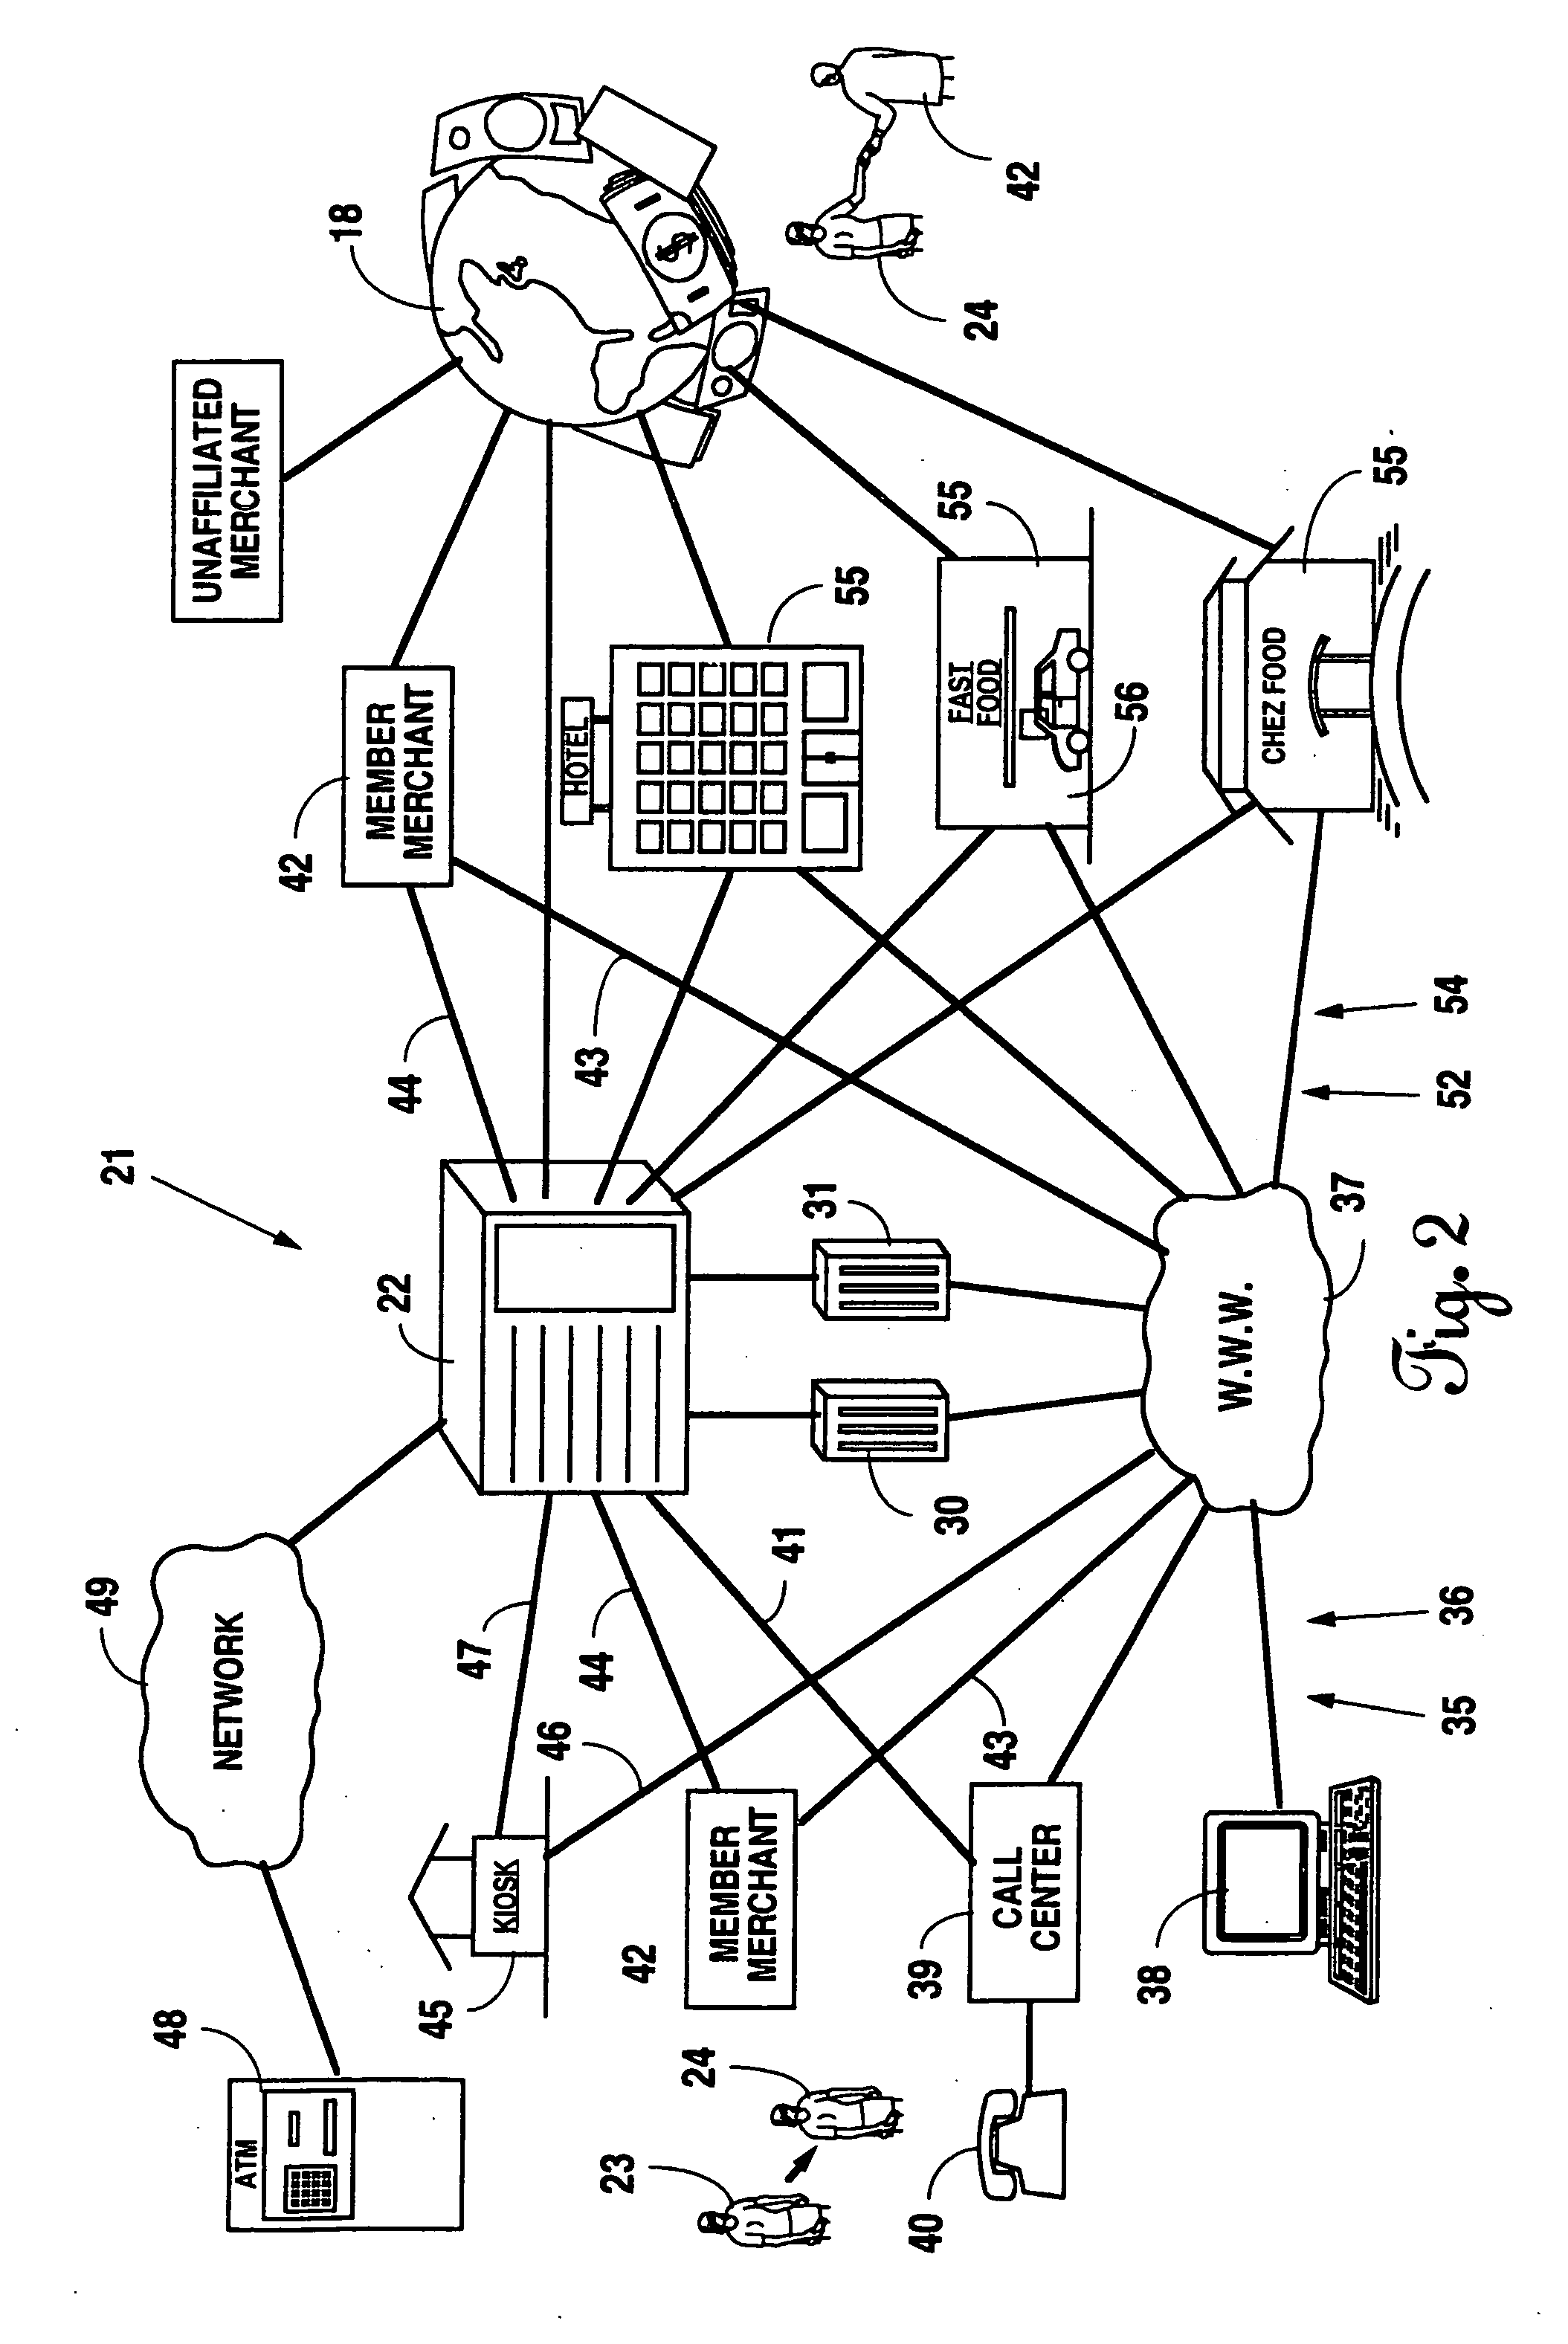 Network topology for processing consumer financial transactions